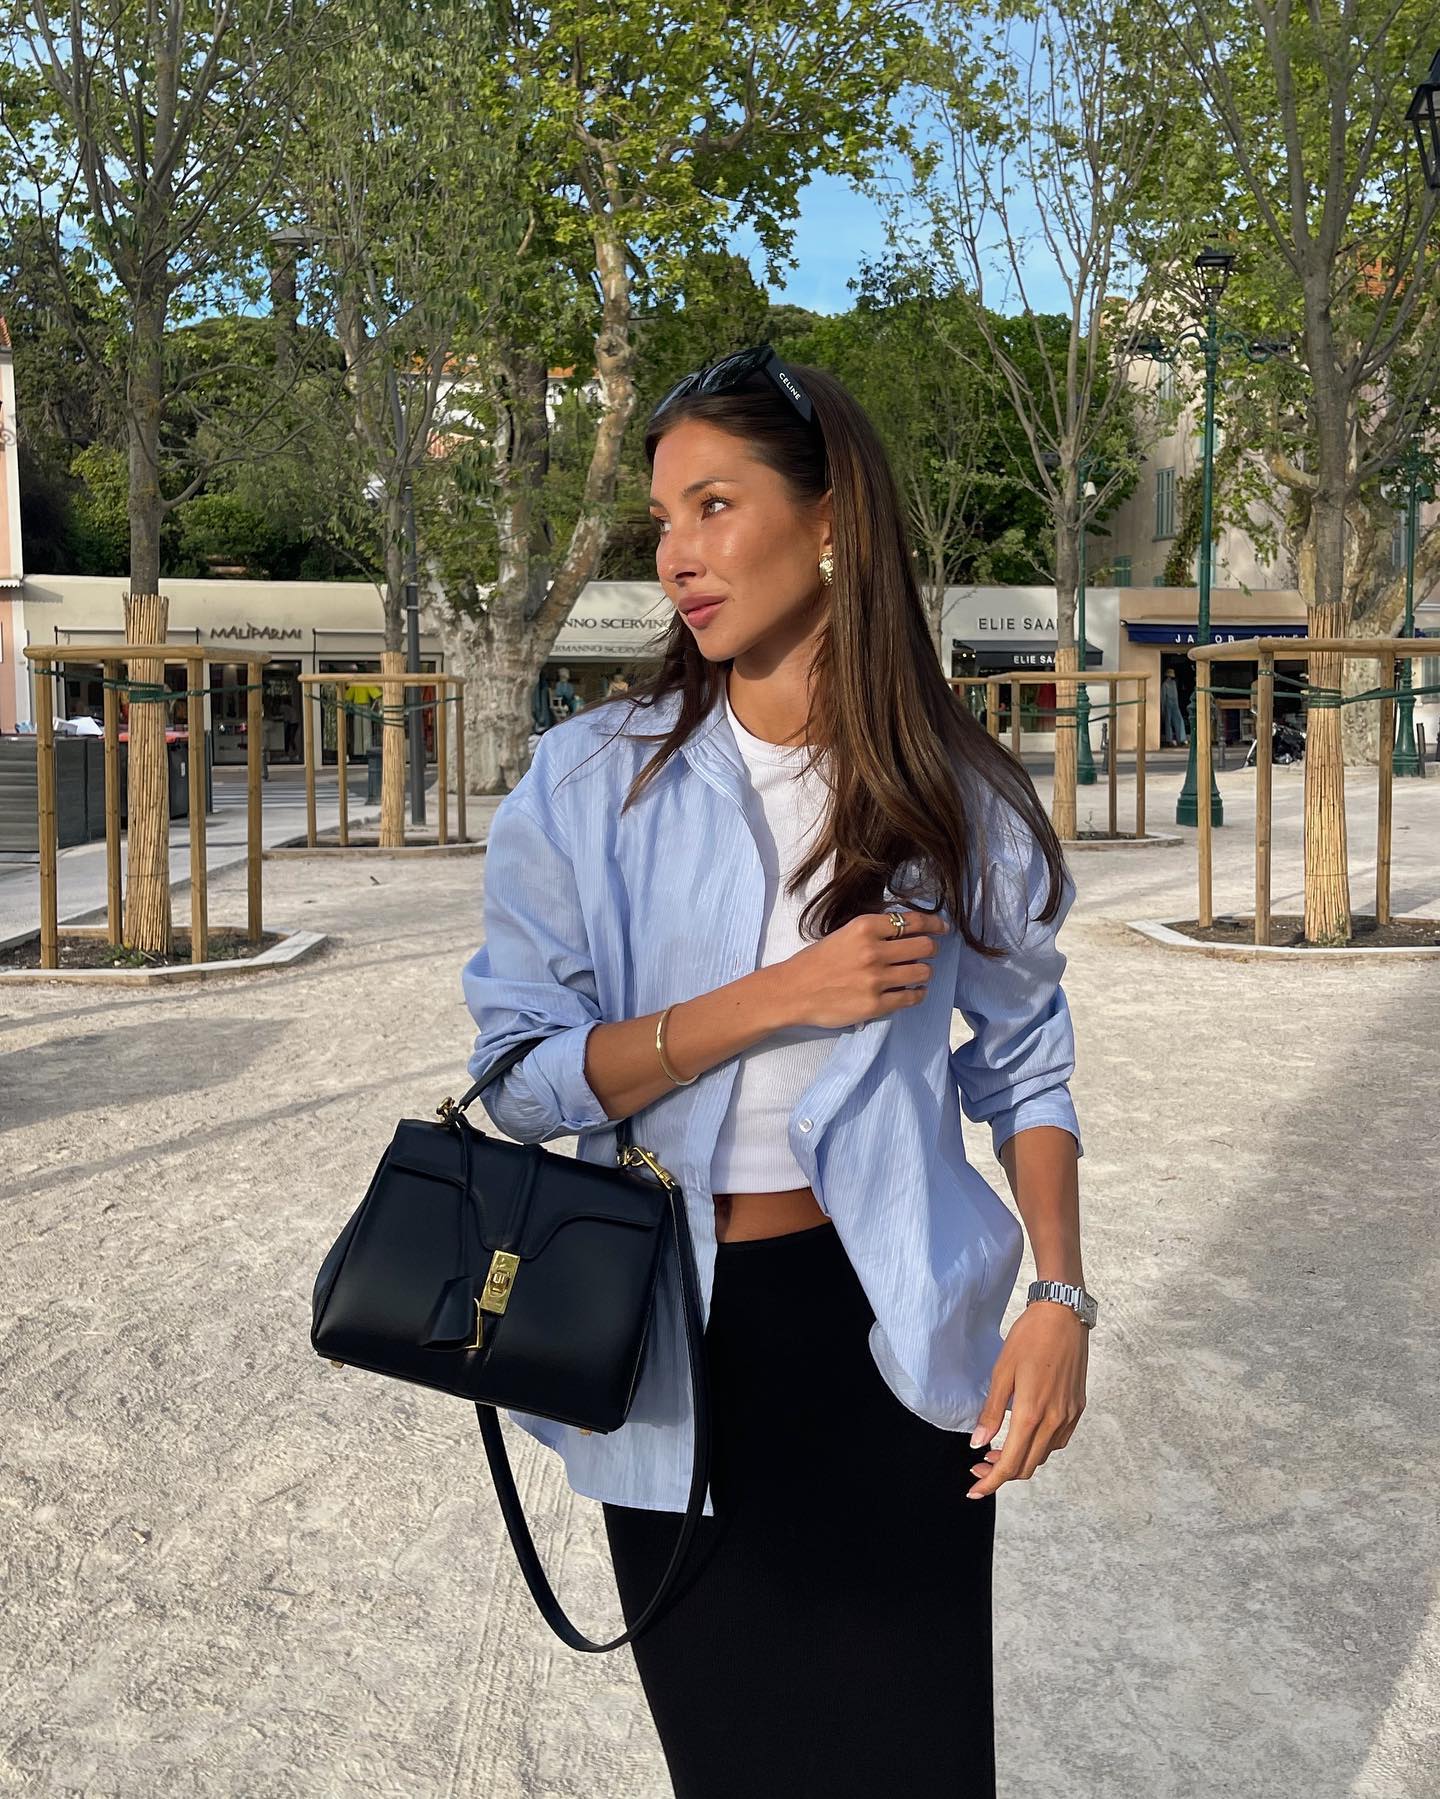 Stylish female influencer Felicia Akerstrom wears a light blue button-down shirt, white t-shirt, and black skirt.